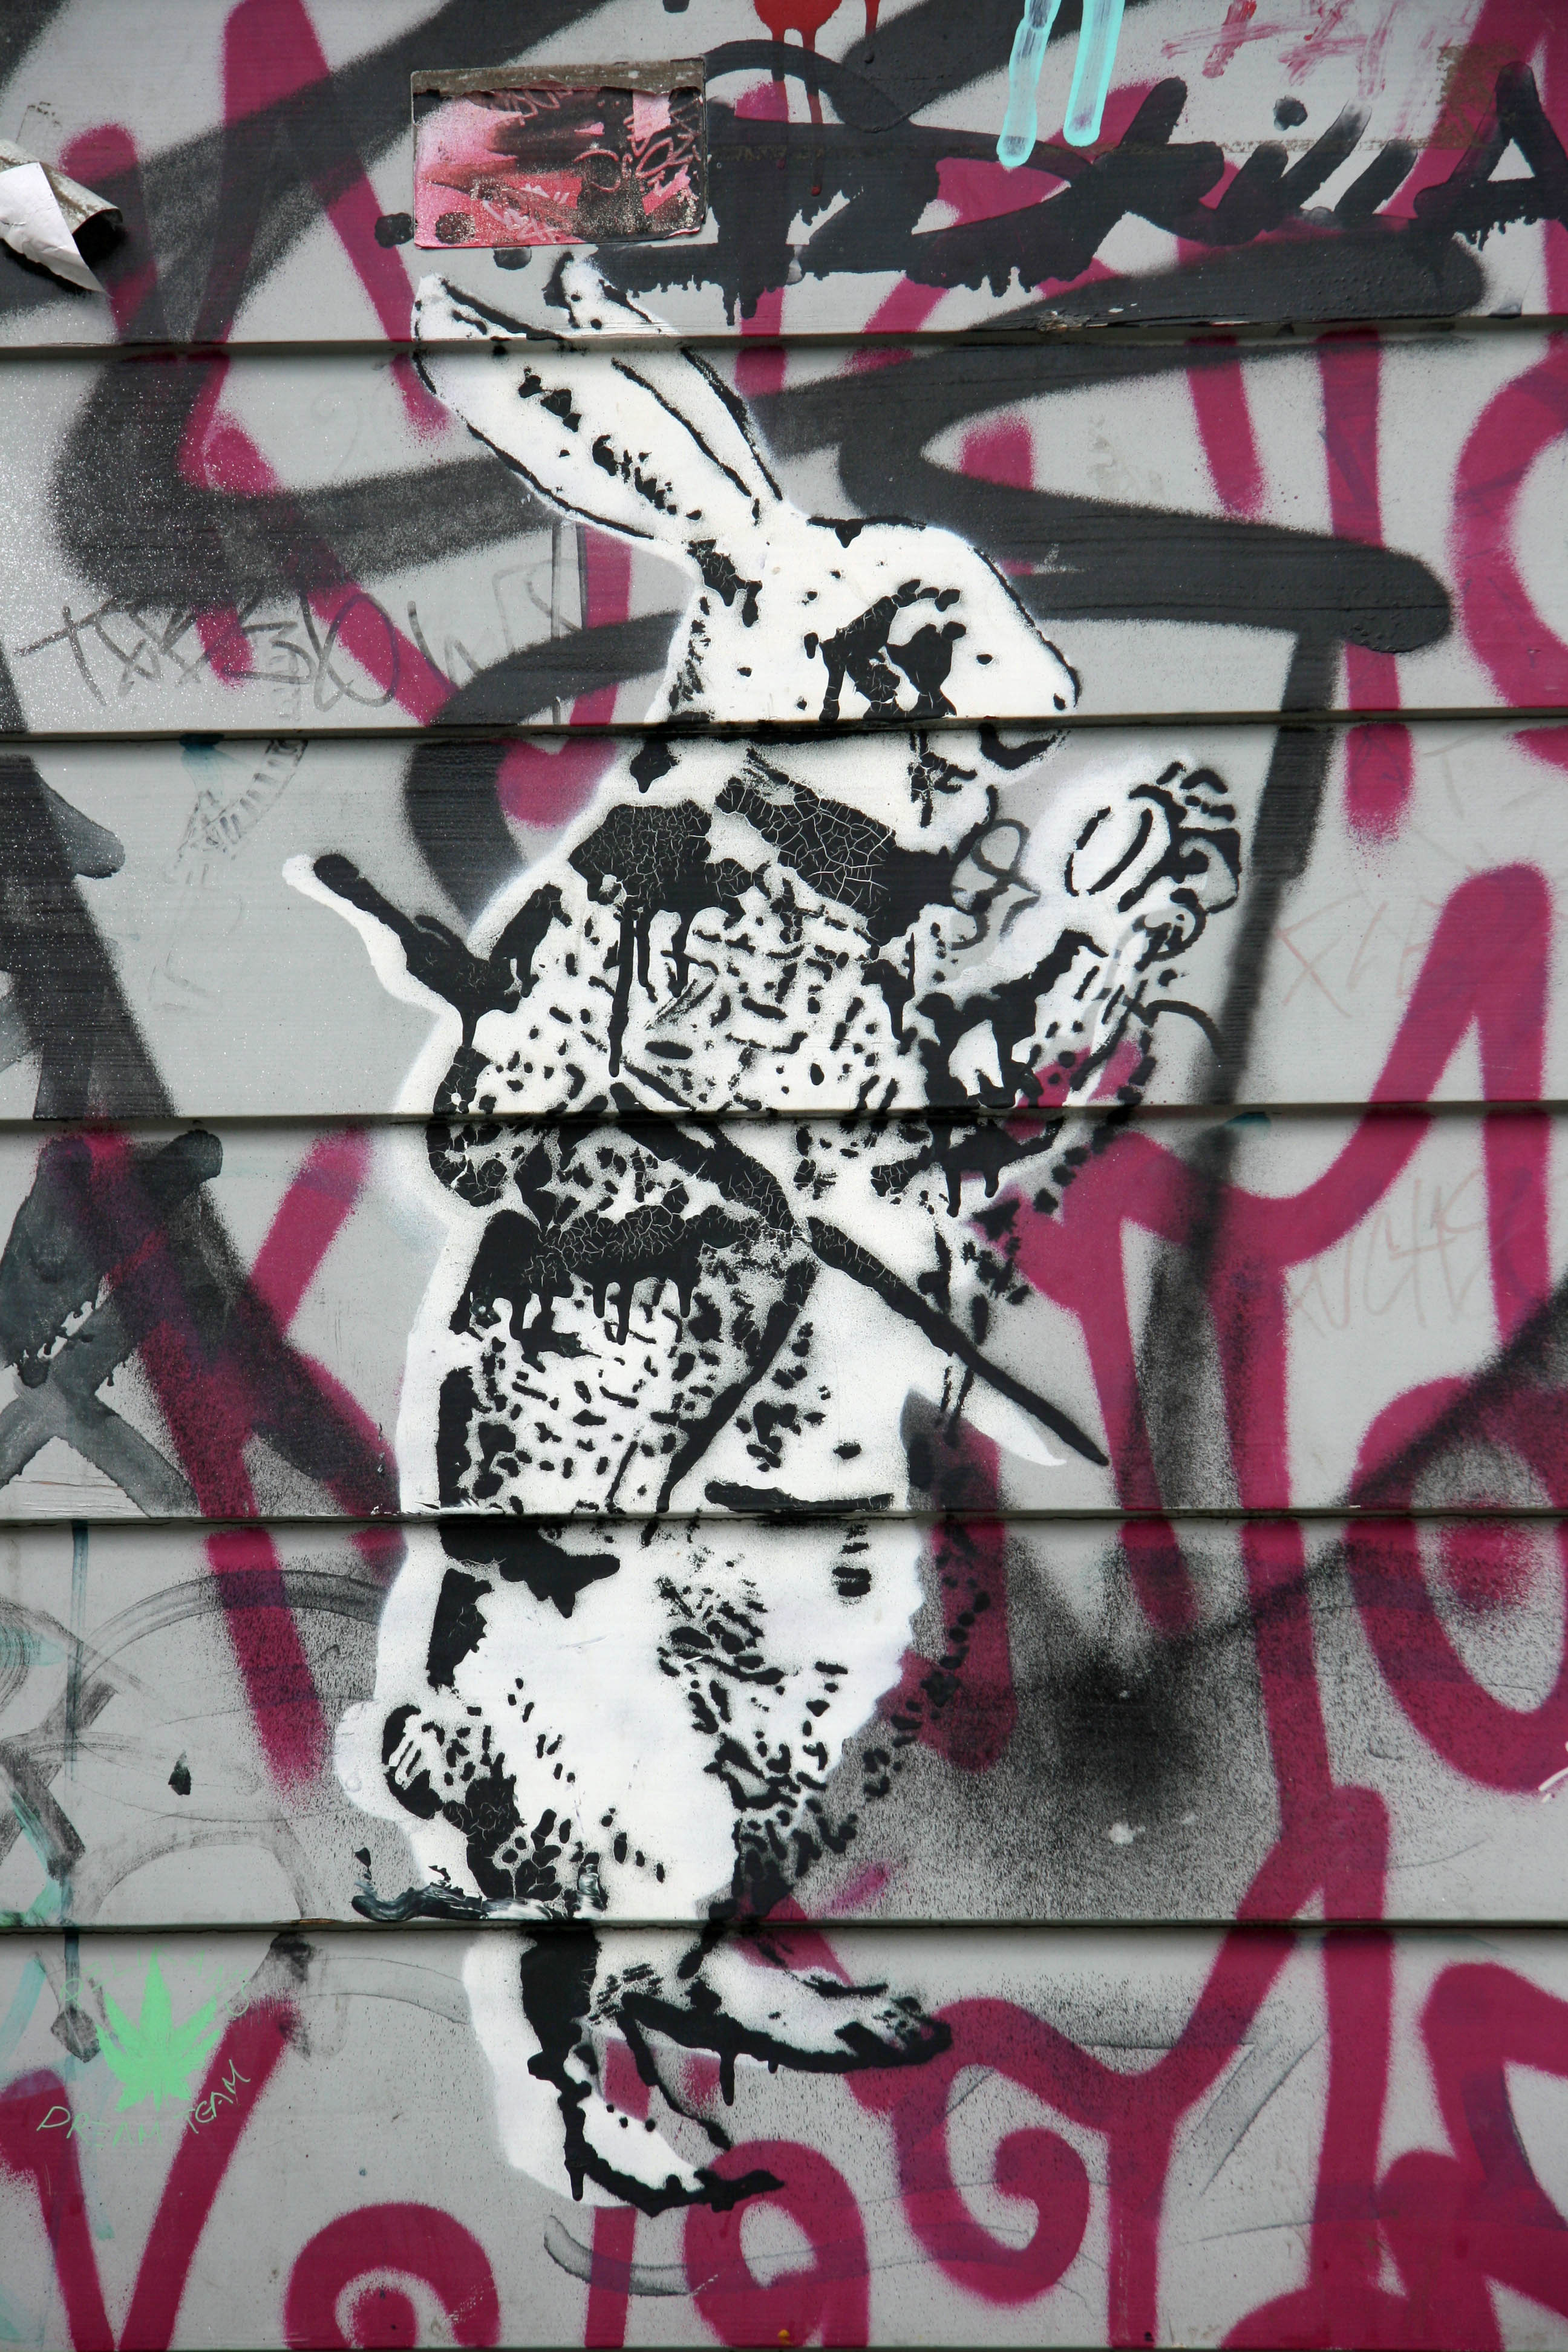 White Rabbit ("I'm late, I'm late for a very important date"): Street Art by Unknown Artist